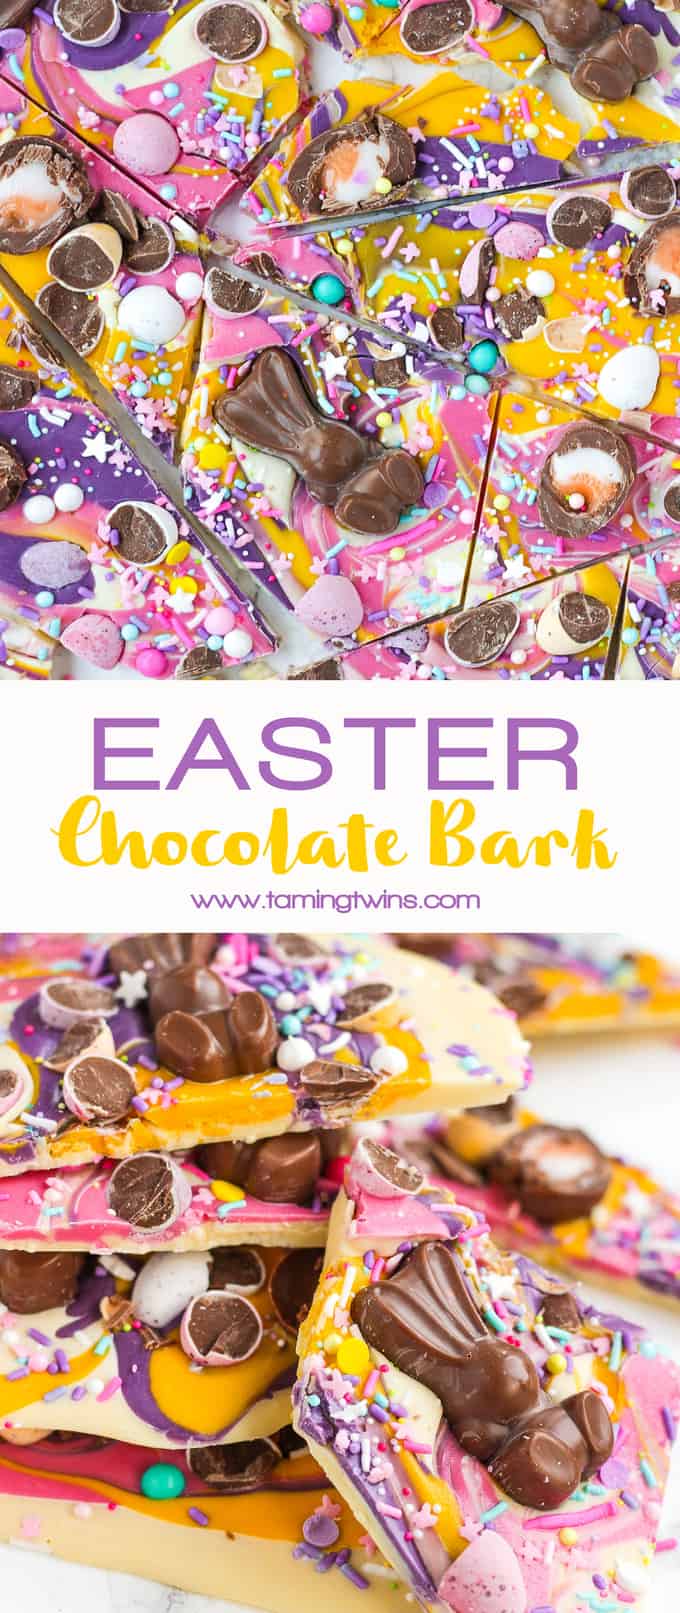 Show stopping Chocolate Easter Bark (with HOW TO VIDEO!). Super simple and easy to make, topped with candy eggs, chocolates and sprinkles, this is a no bake, must make for Easter.